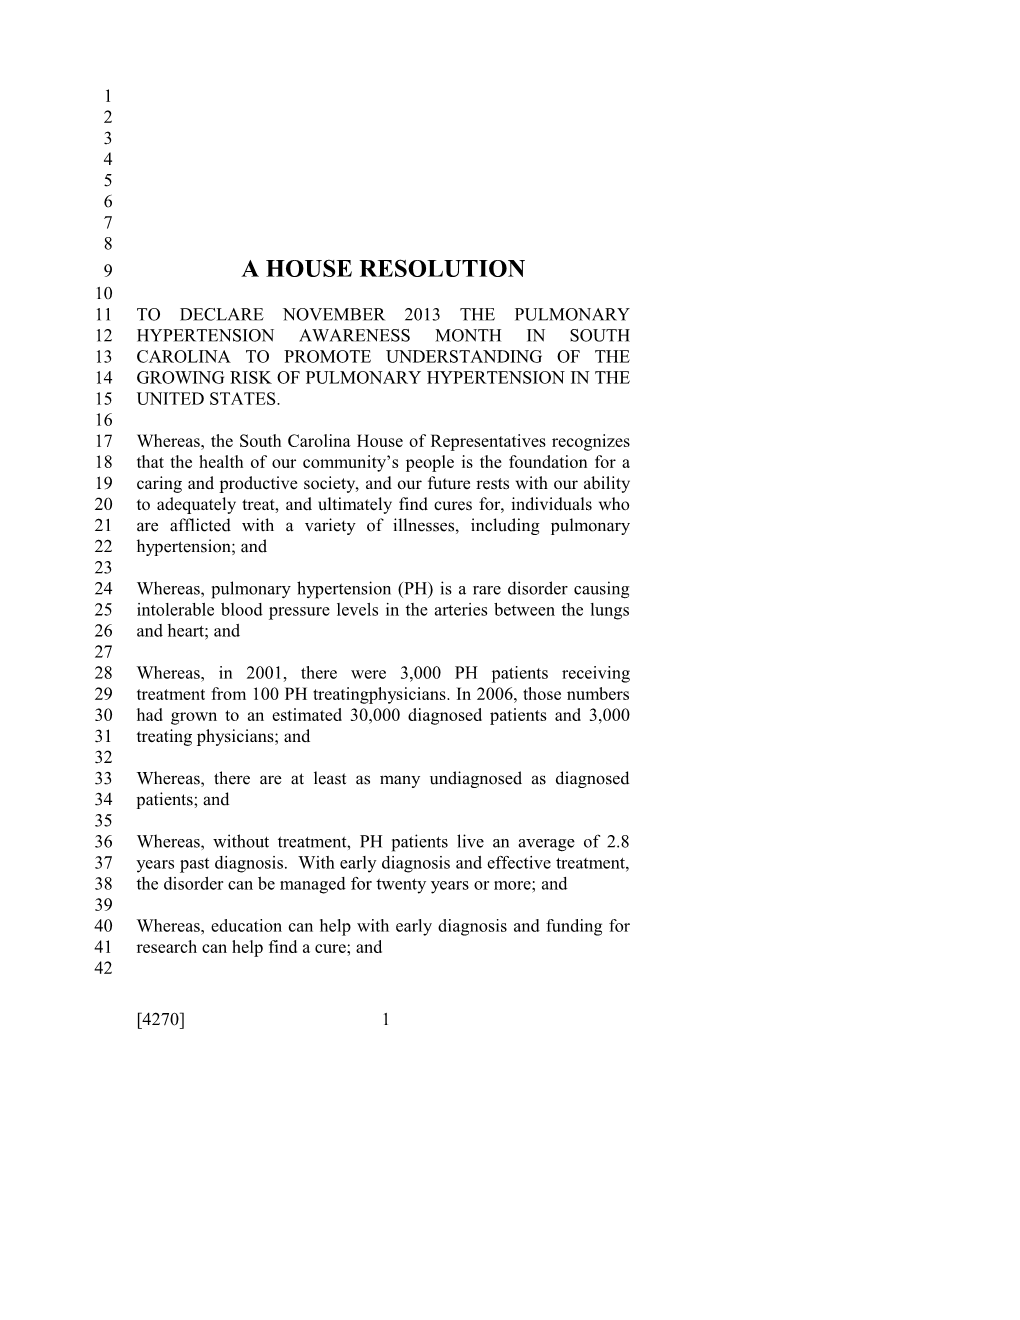 A House Resolution s15